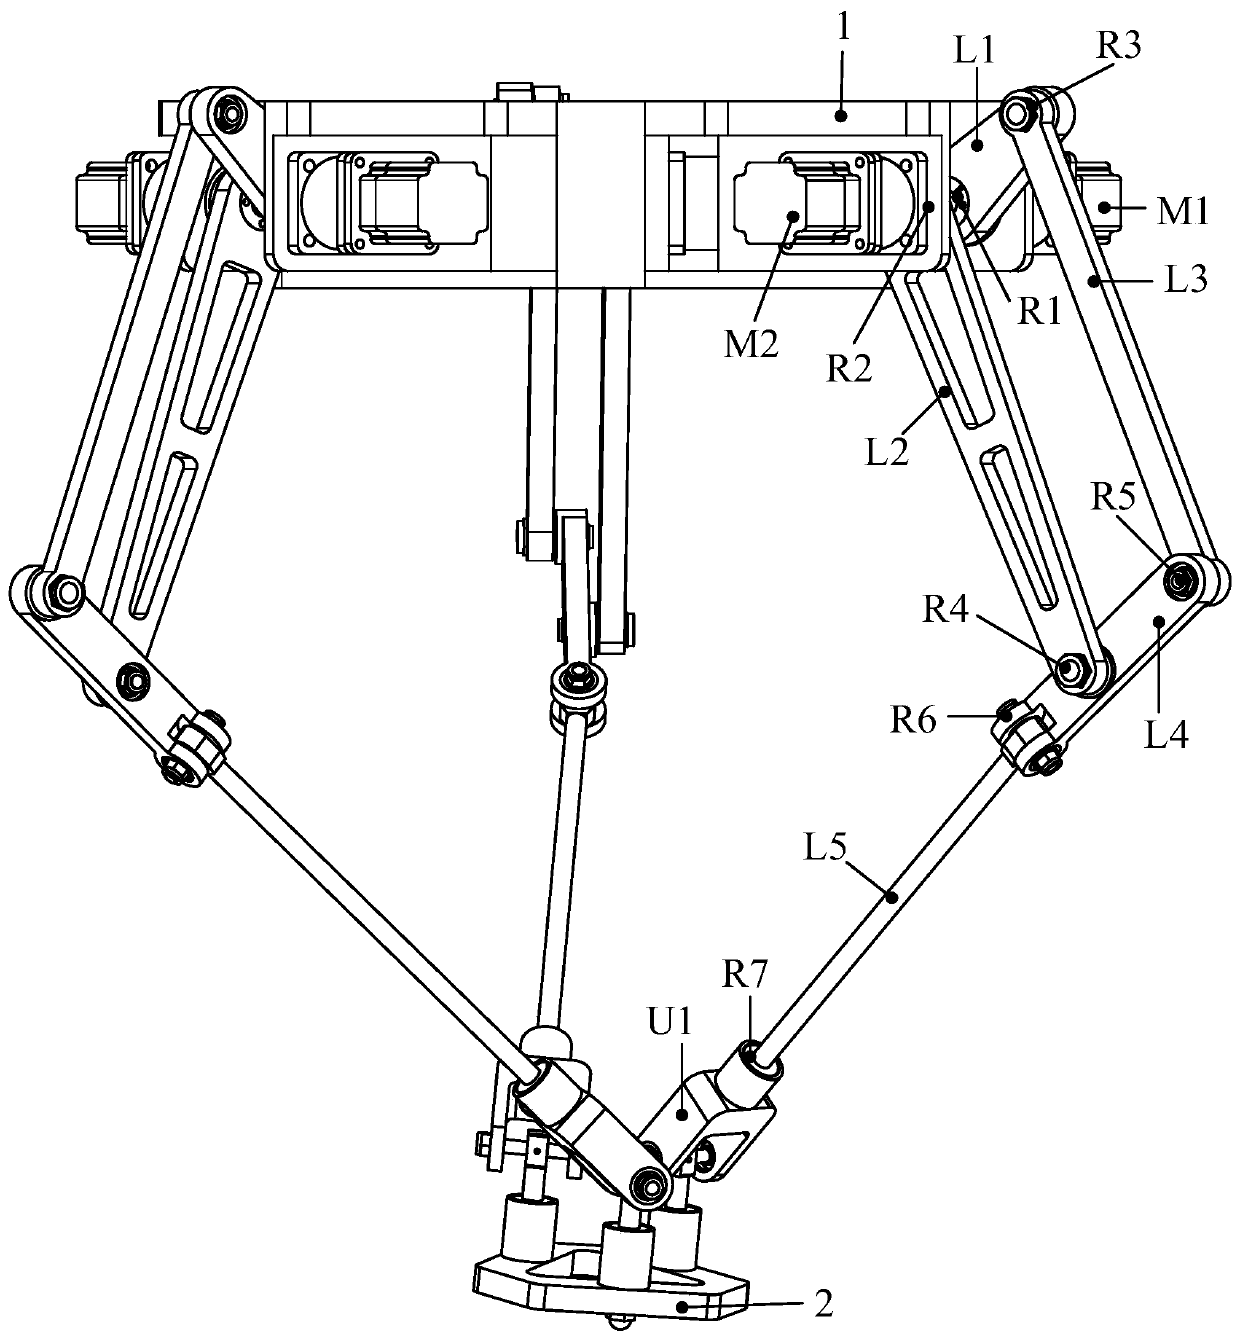 Parallel robot with large working space and low inertia